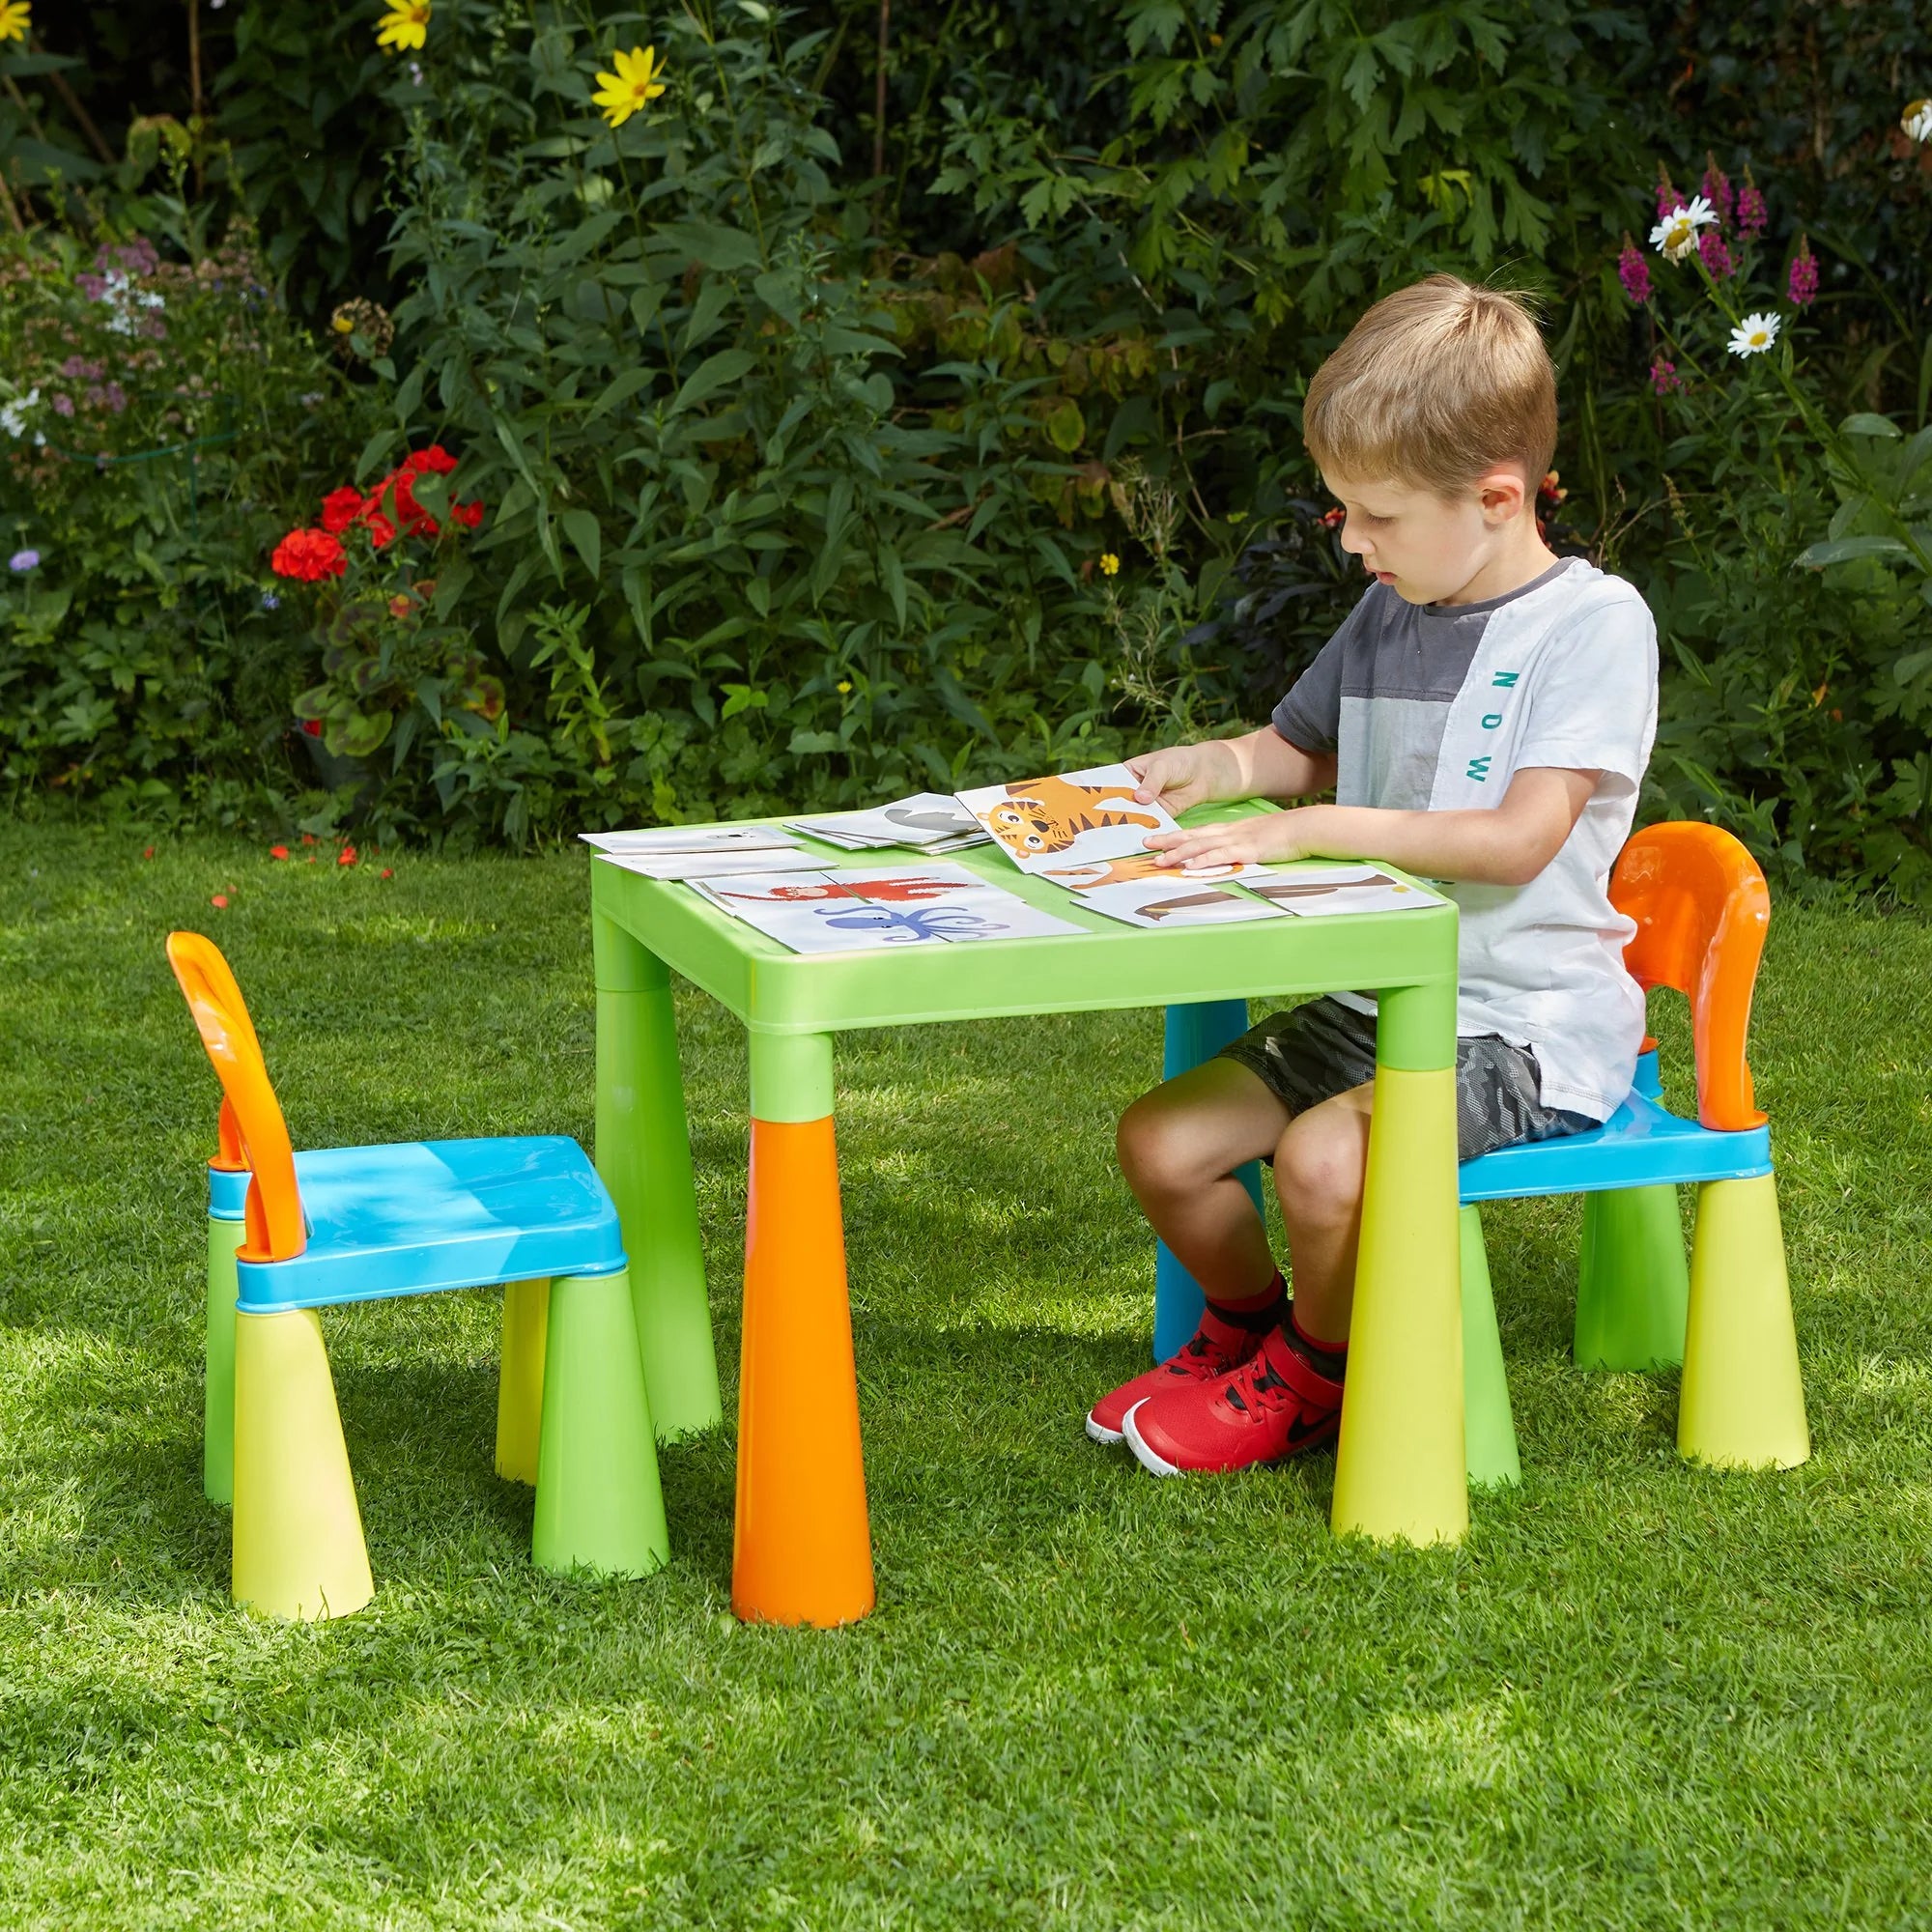 Kids Plastic Table & Chairs - Multi-Coloured